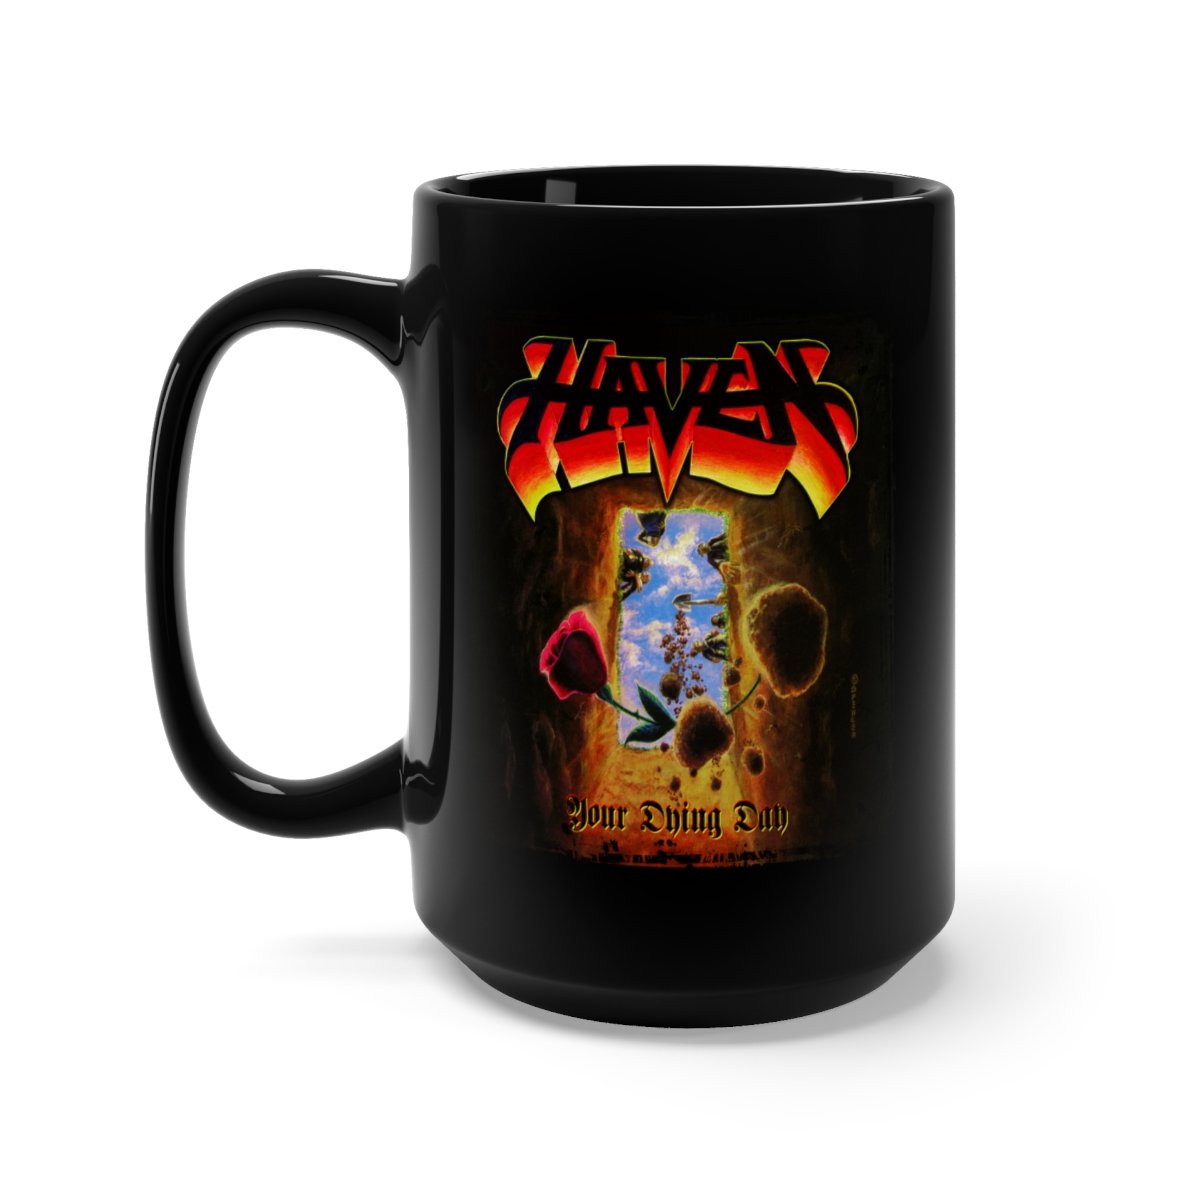 Haven – Your Dying Day  15oz Black Mug